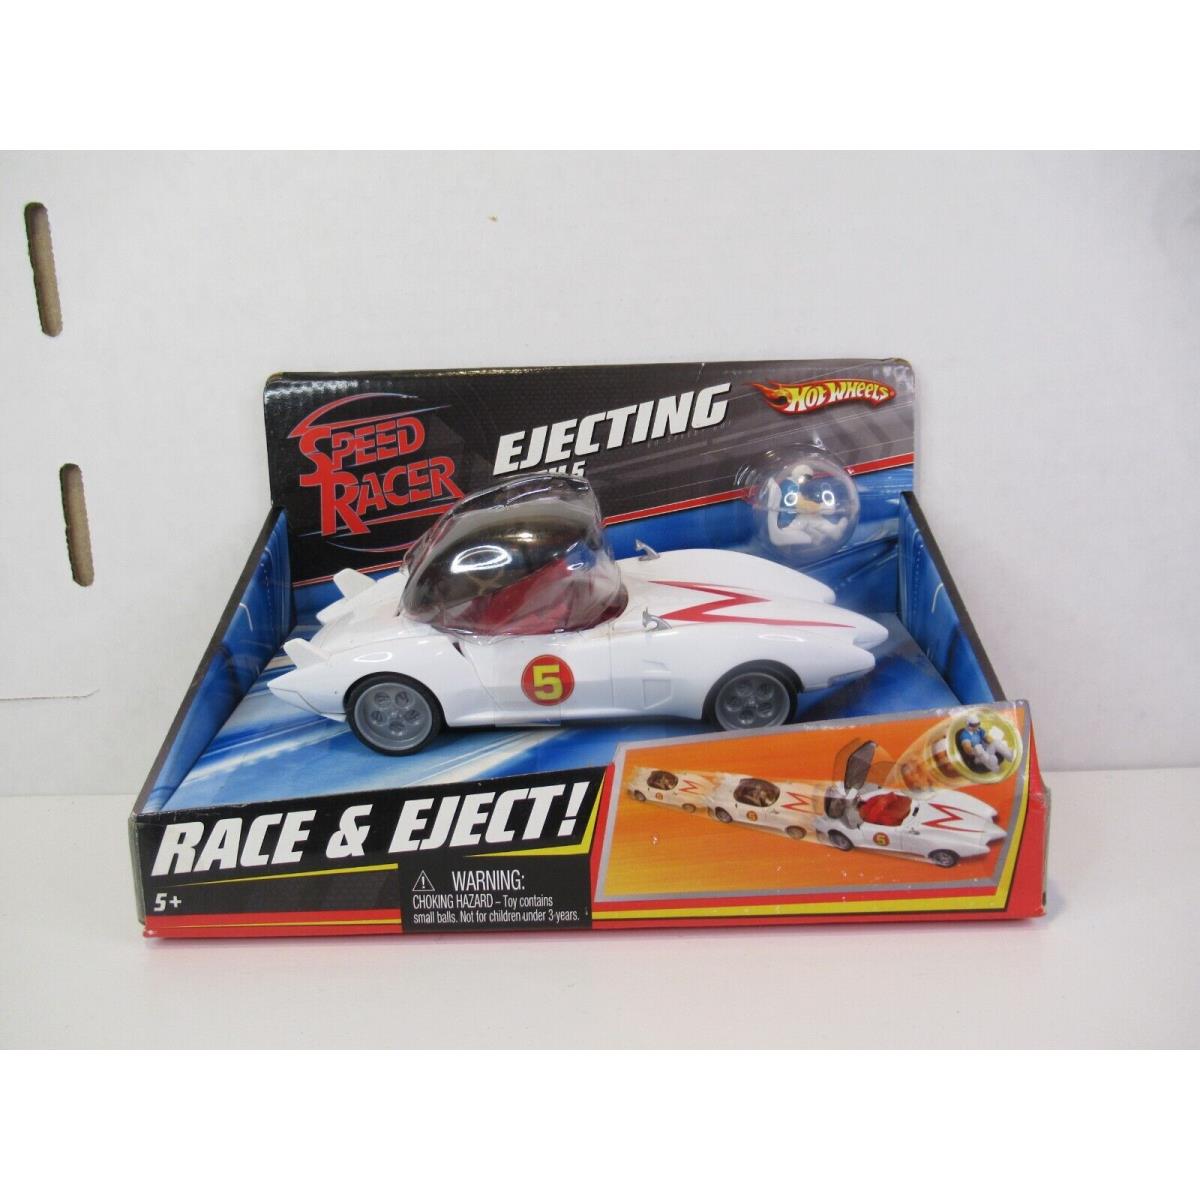 2007 Hot Wheels Speed Racer Ejecting Mach 5 Race Eject